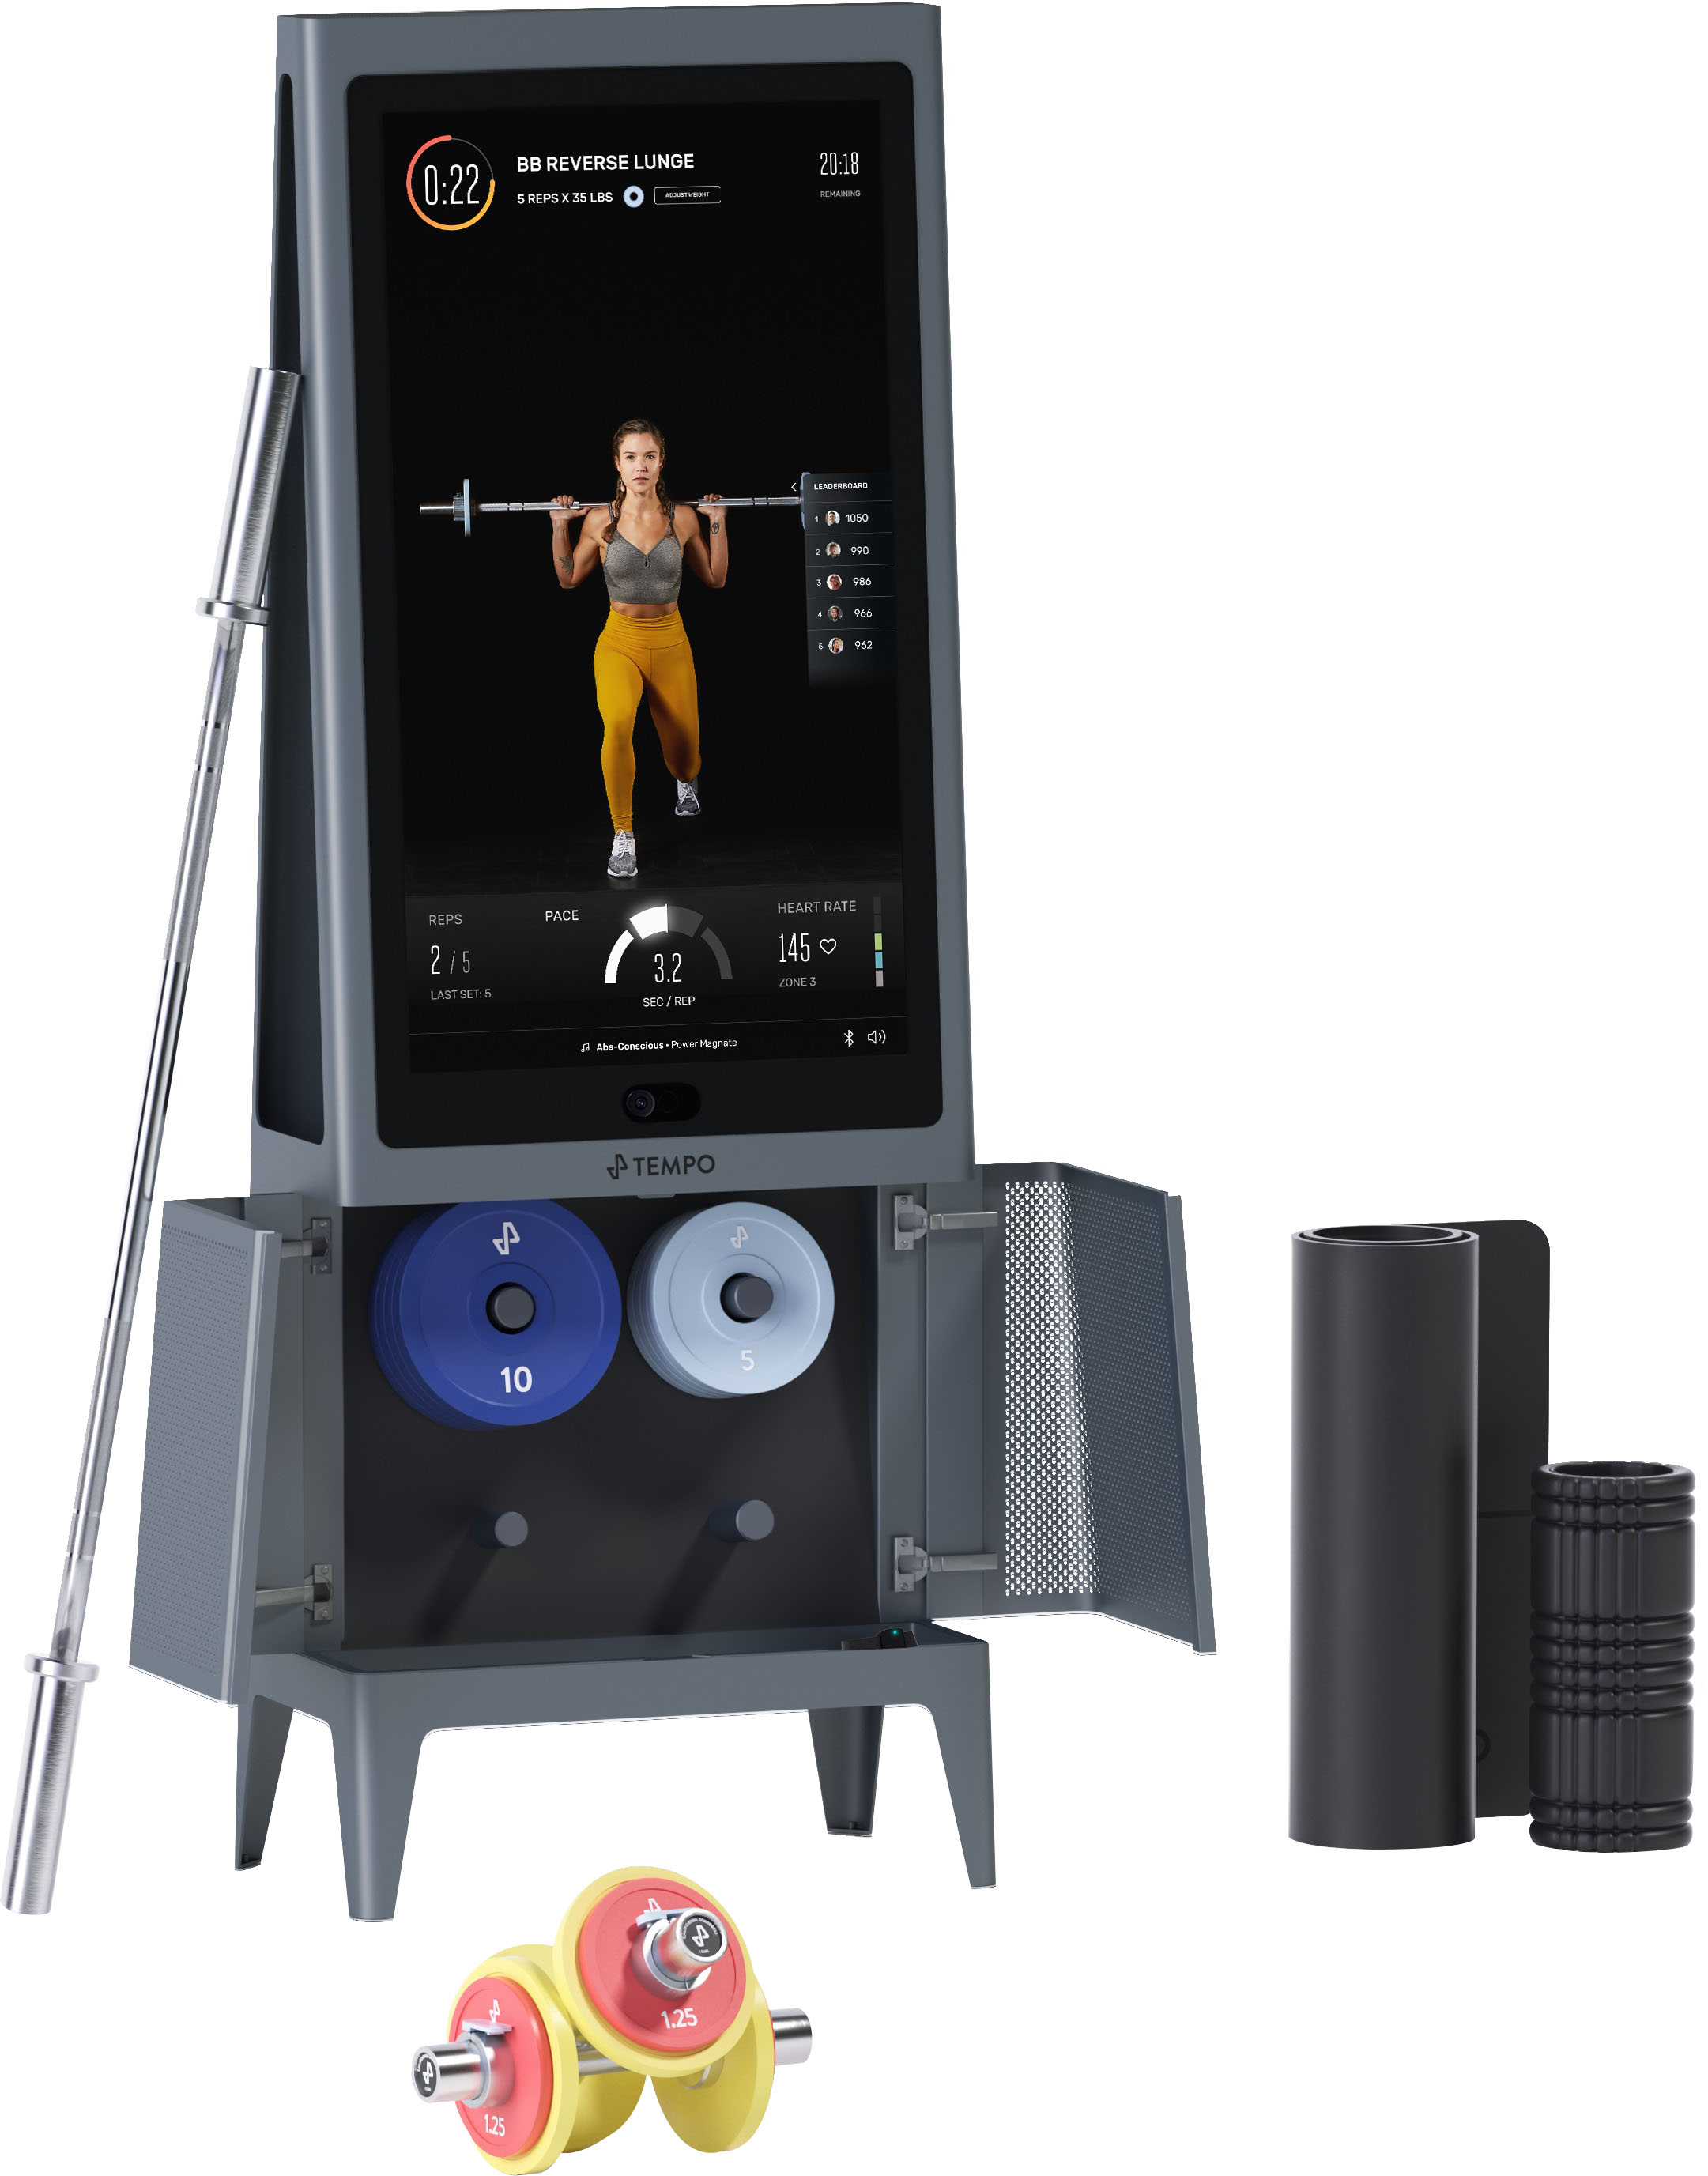 Shop Fitness Gifts for Dad from Tempo